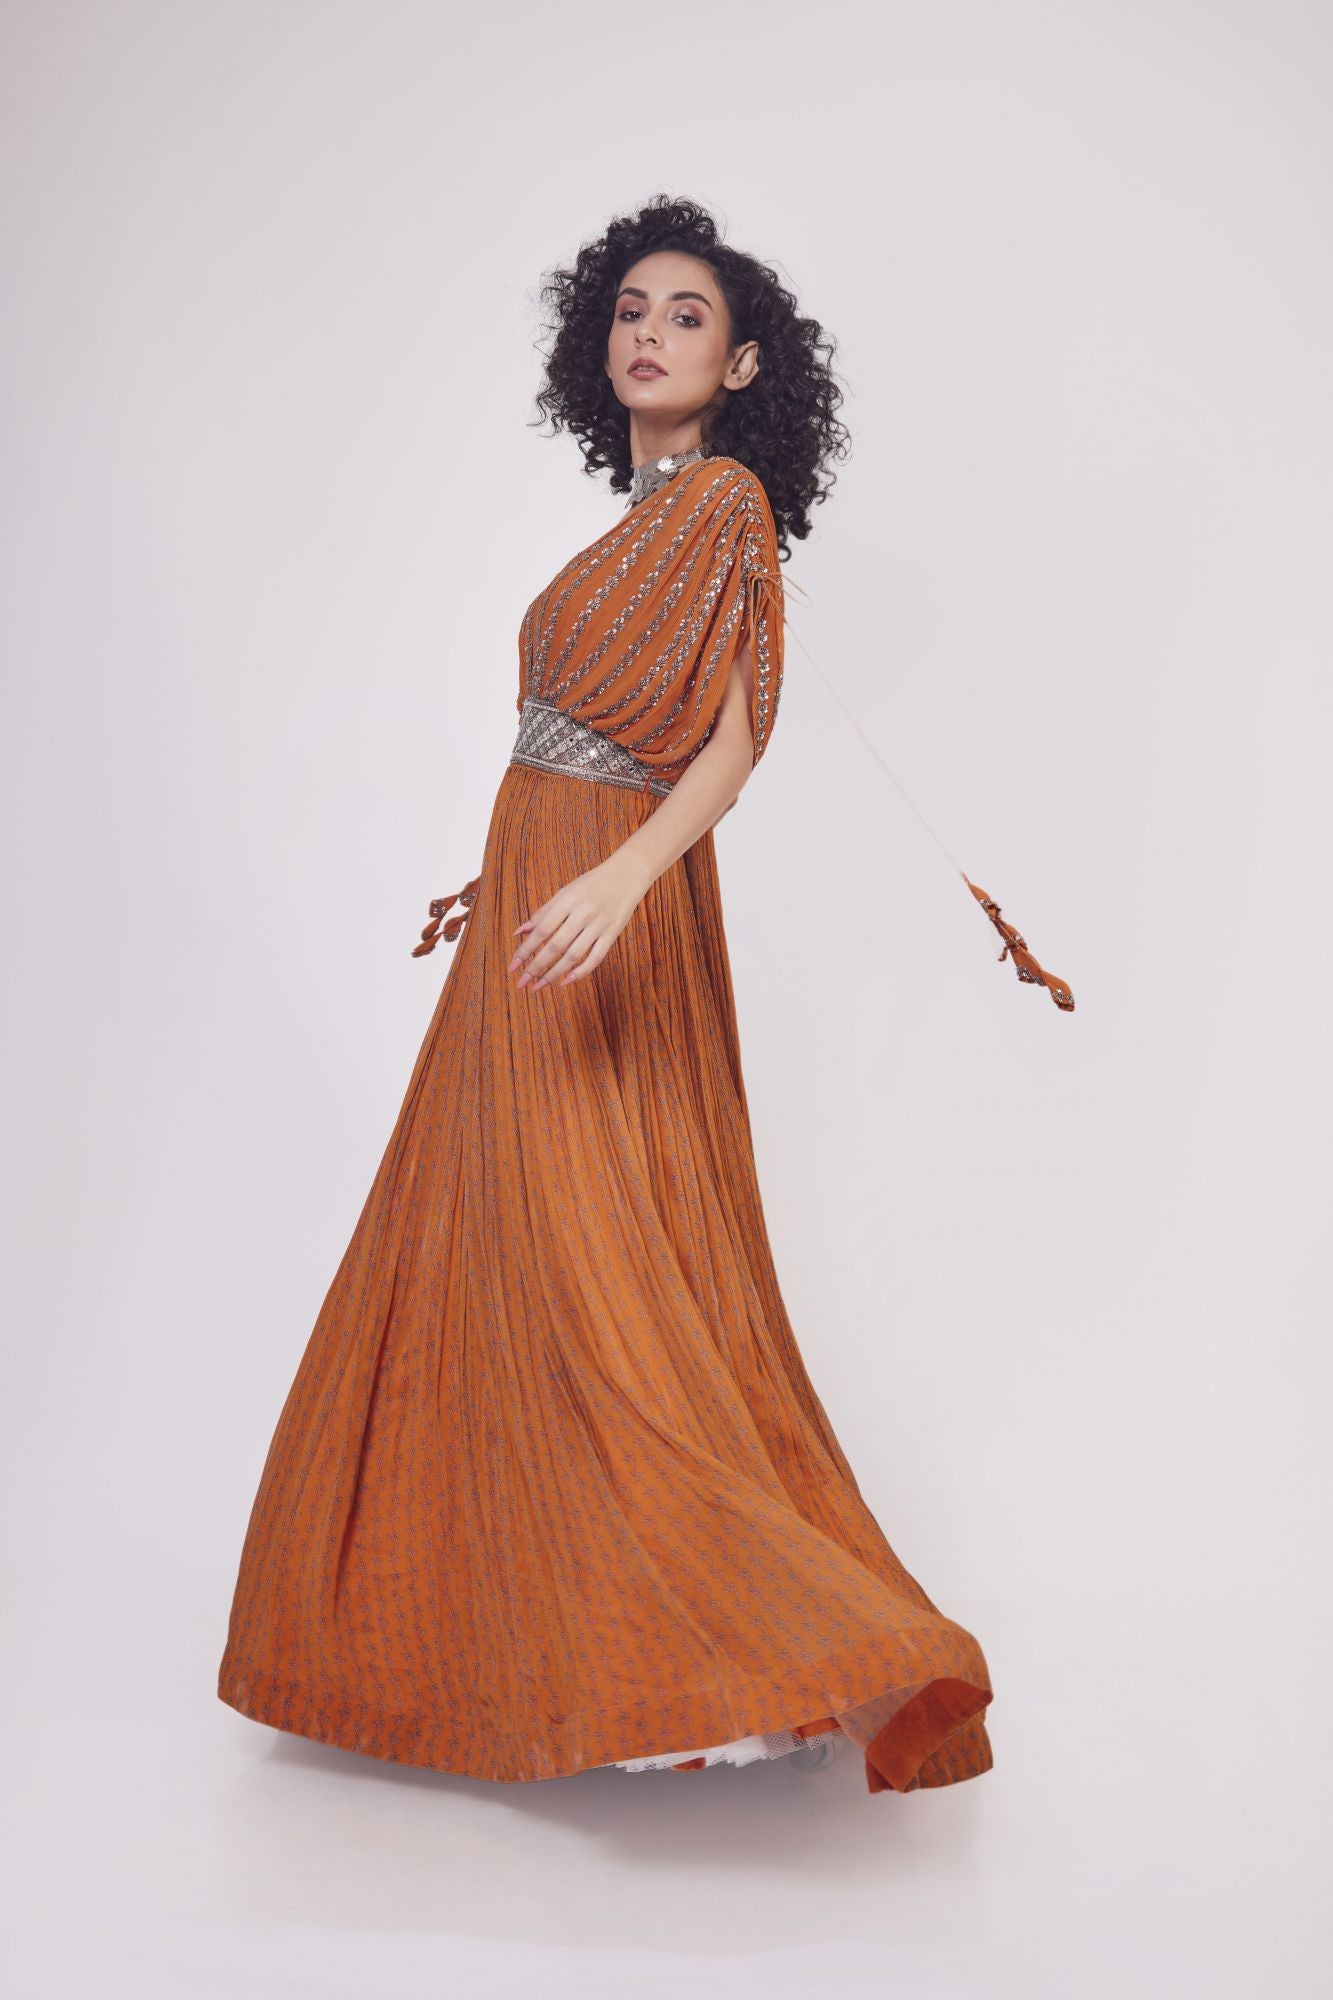 Buy orange sequin work georgette gown online in USA. Shop the best and latest designs in embroidered sarees, designer sarees, Anarkali suit, lehengas, sharara suits for weddings and special occasions from Pure Elegance Indian fashion store in USA.-gown